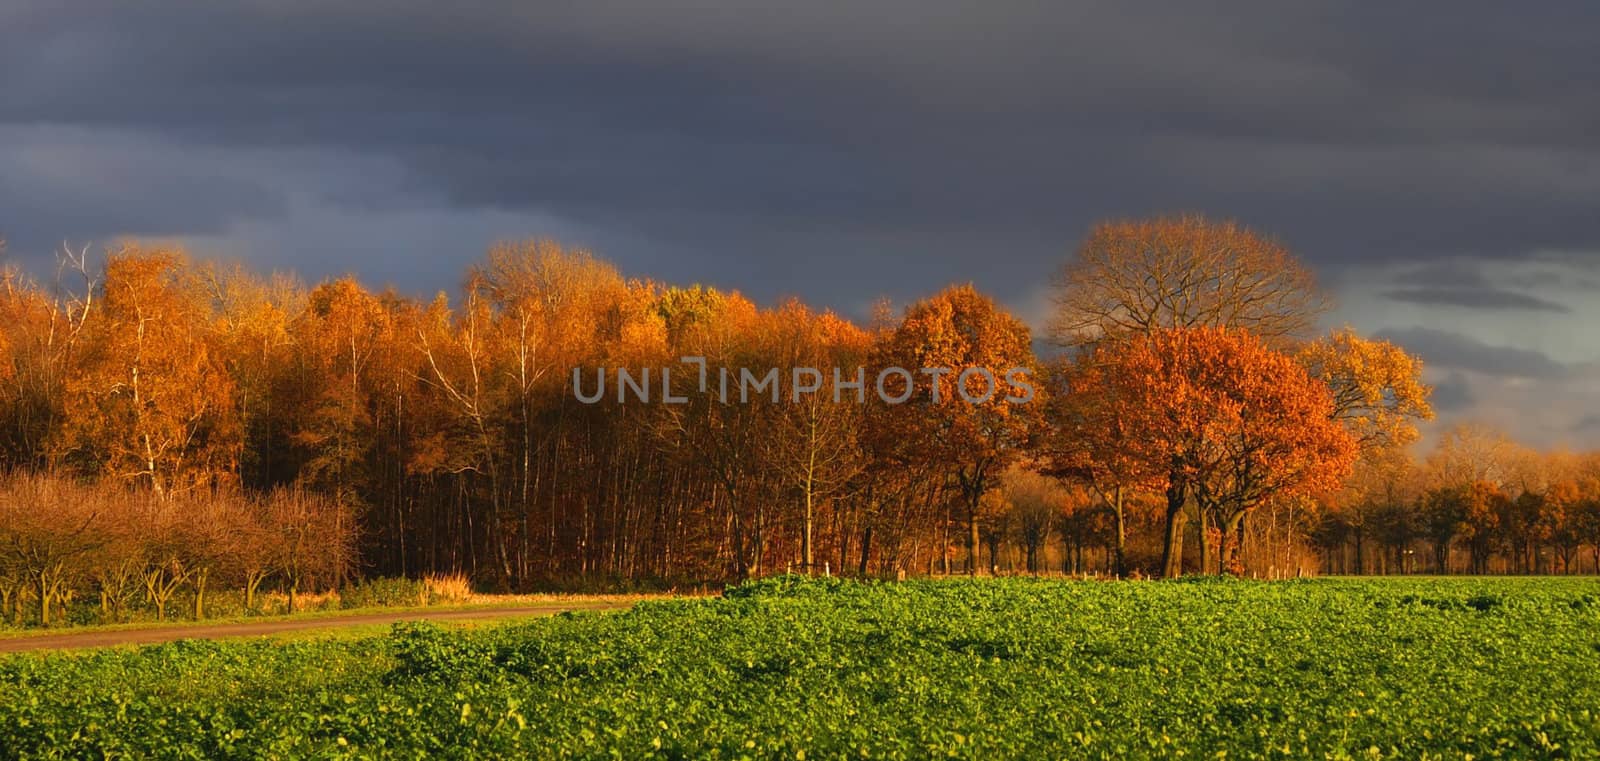 autumn scenery of some nice colored trees with  green farmland field of vegetables on a dark cloudy day   by karinclaus